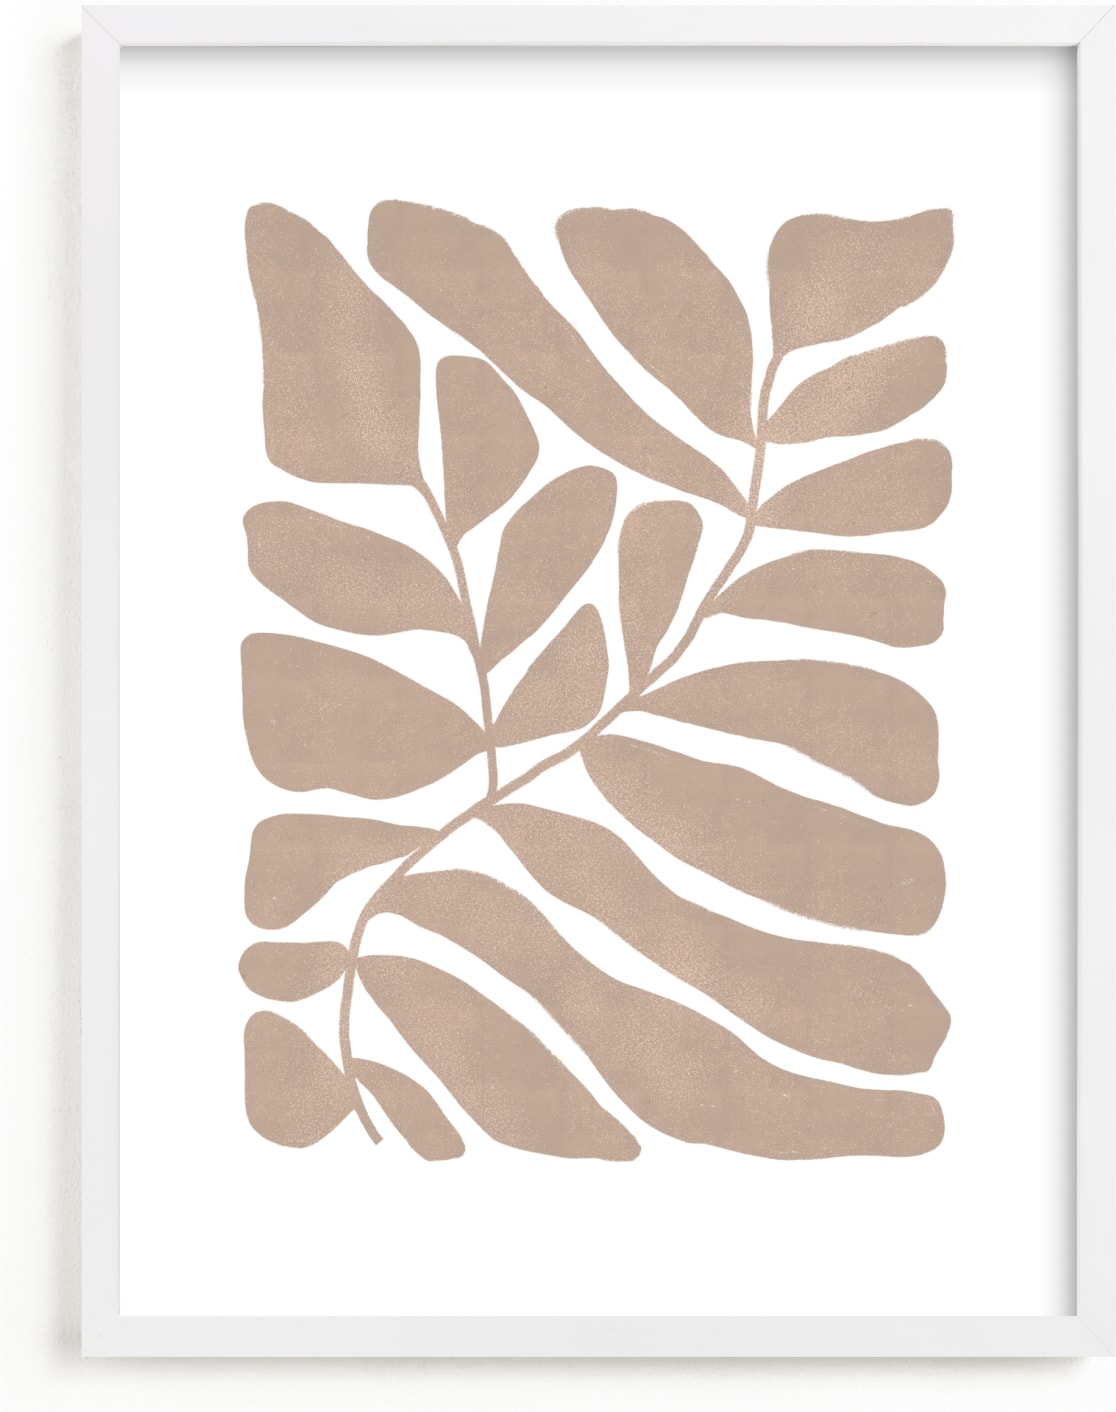 This is a brown art by Kelly Ambrose called Loopy Leaves I.